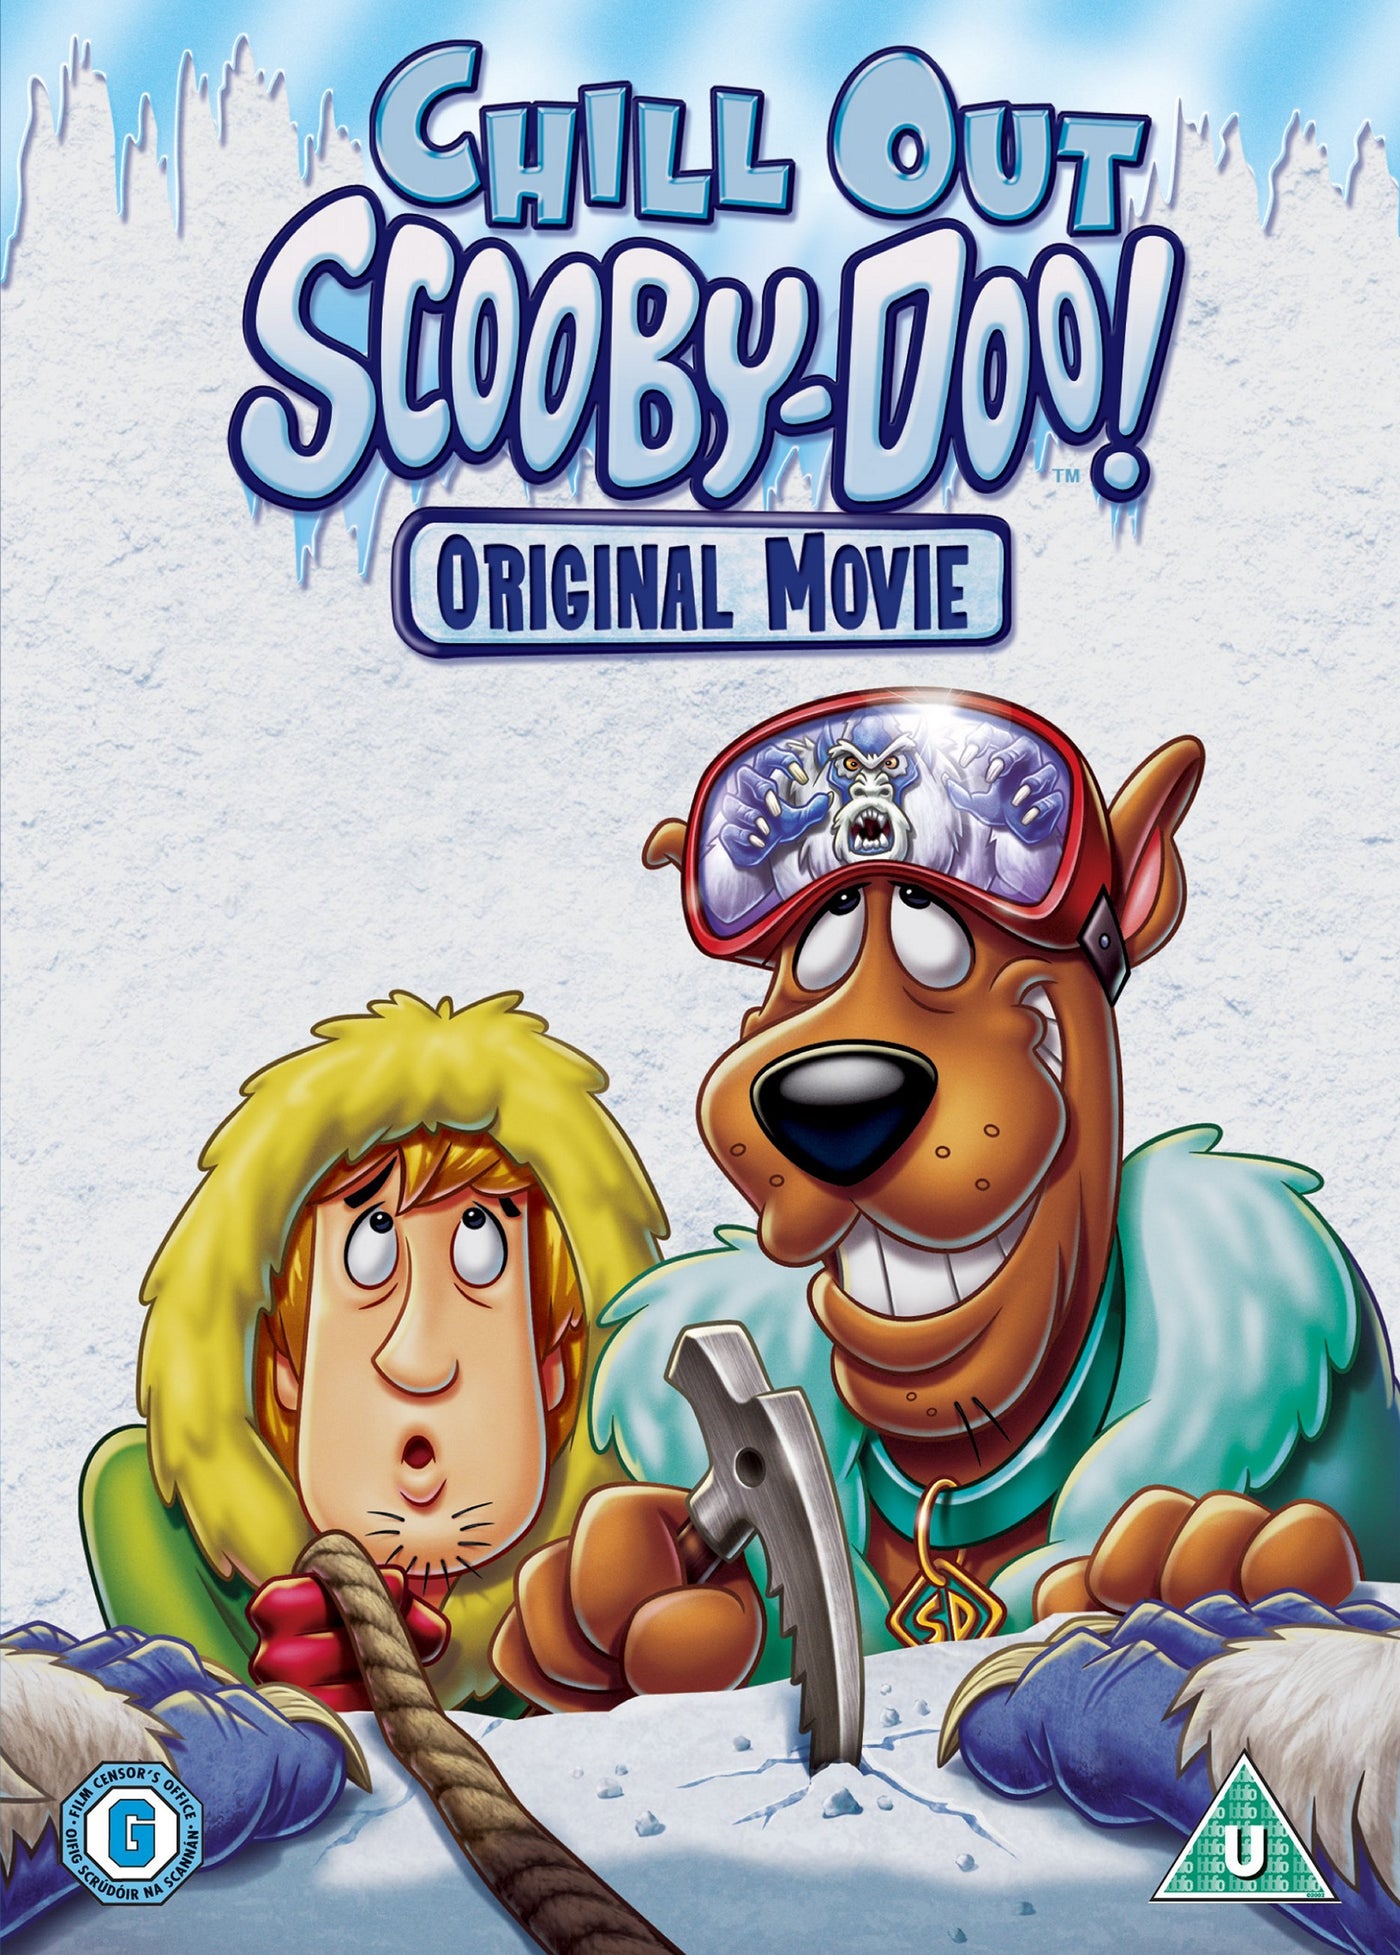 Chill Out Scooby Doo (Original Movie) [2017] (DVD)